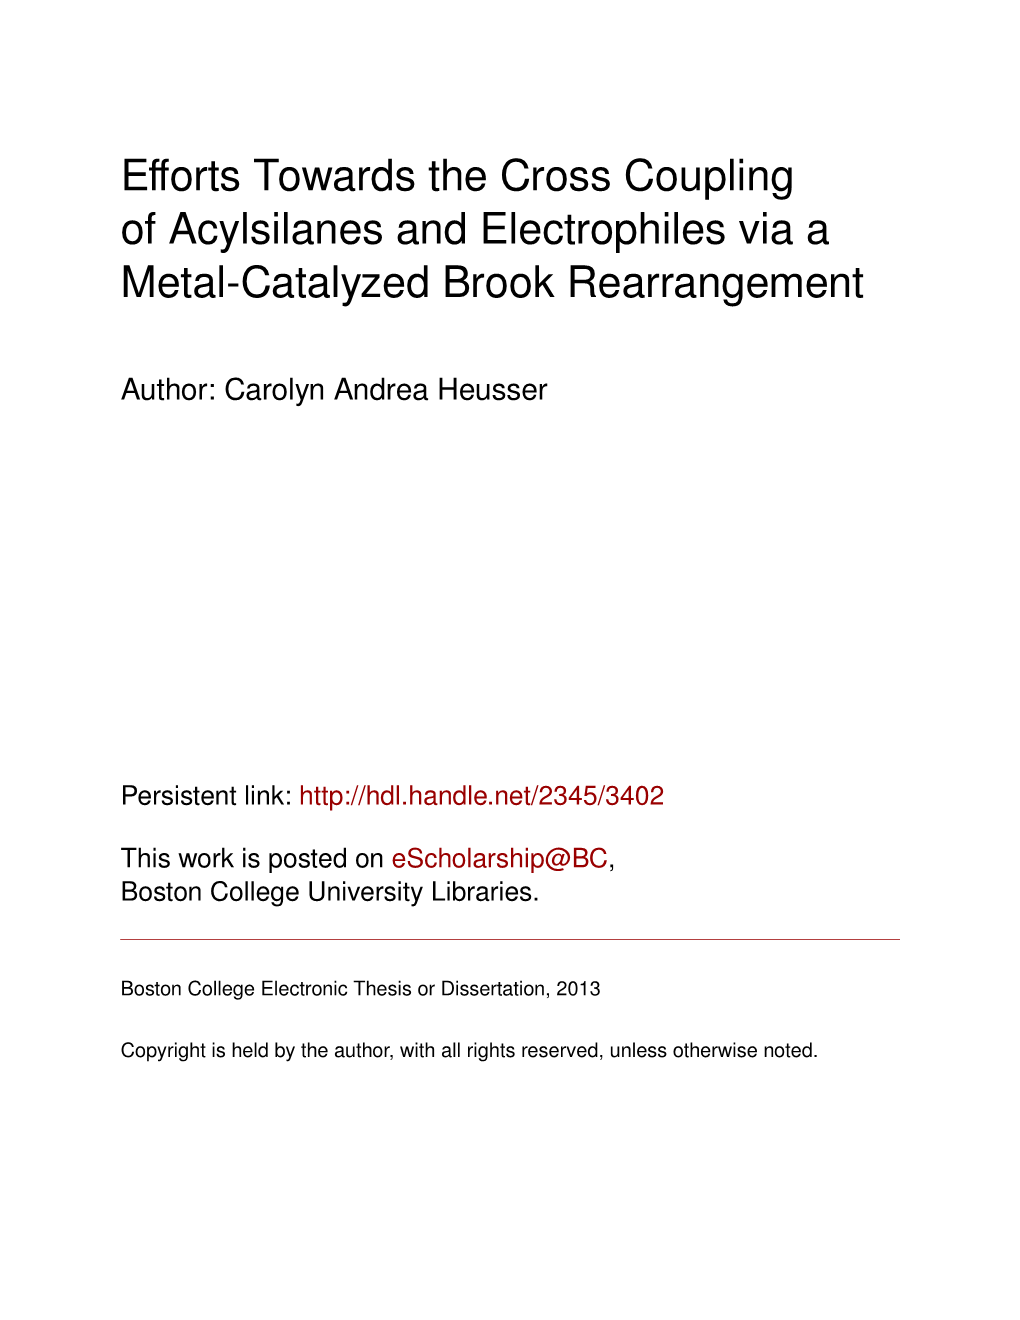 Efforts Towards the Cross Coupling of Acylsilanes and Electrophiles Via A